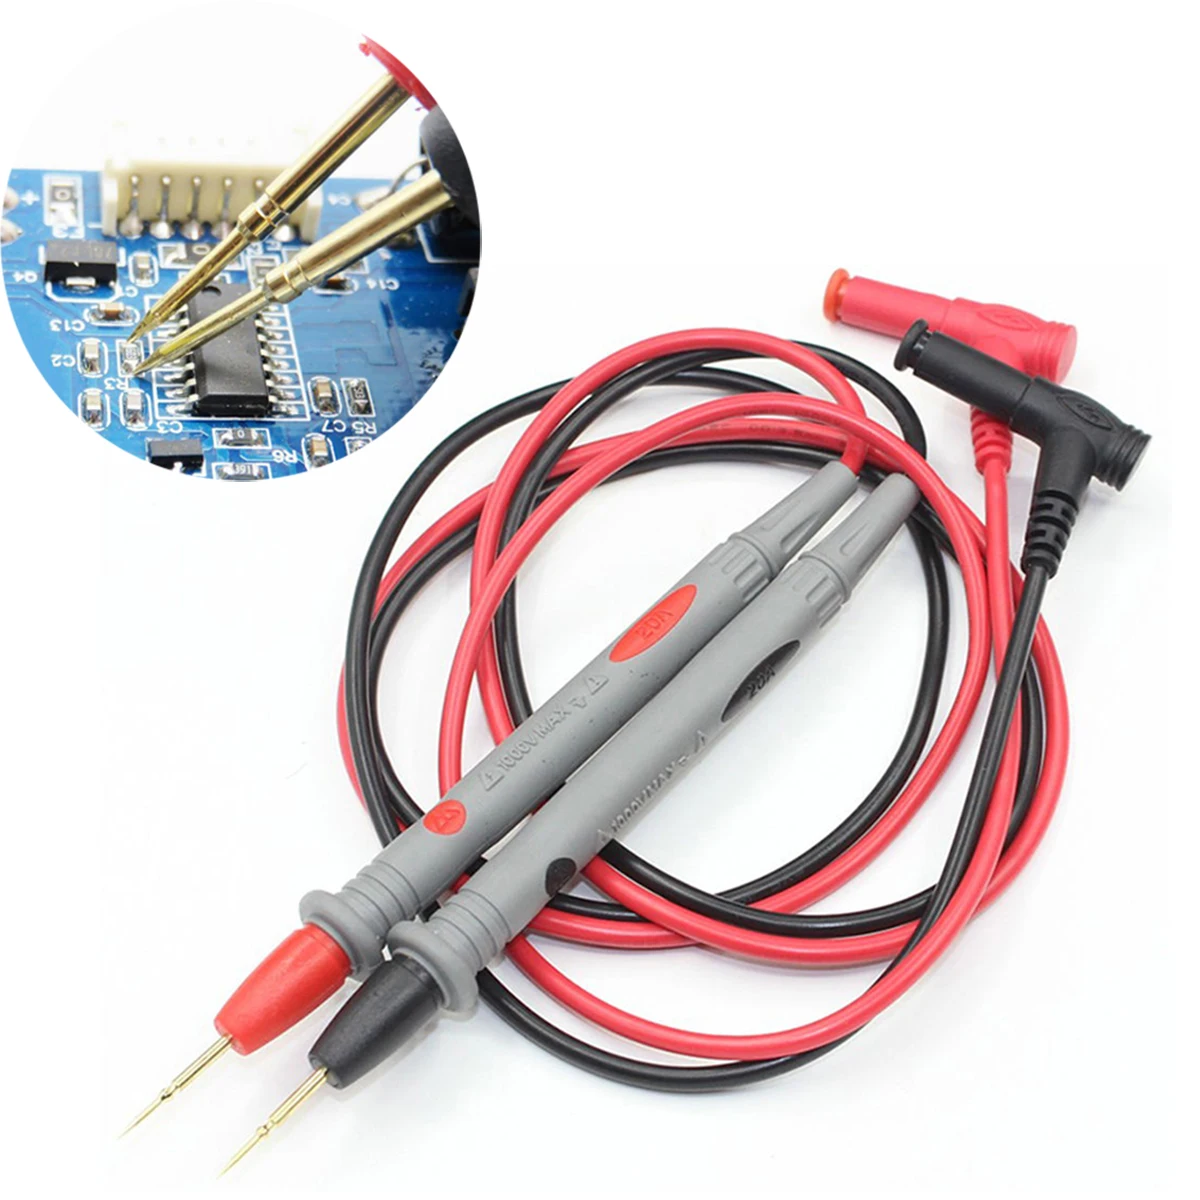 Multimeter Point Cables 1000V 20A Needle Points Multi Meter Test Probe Cord 